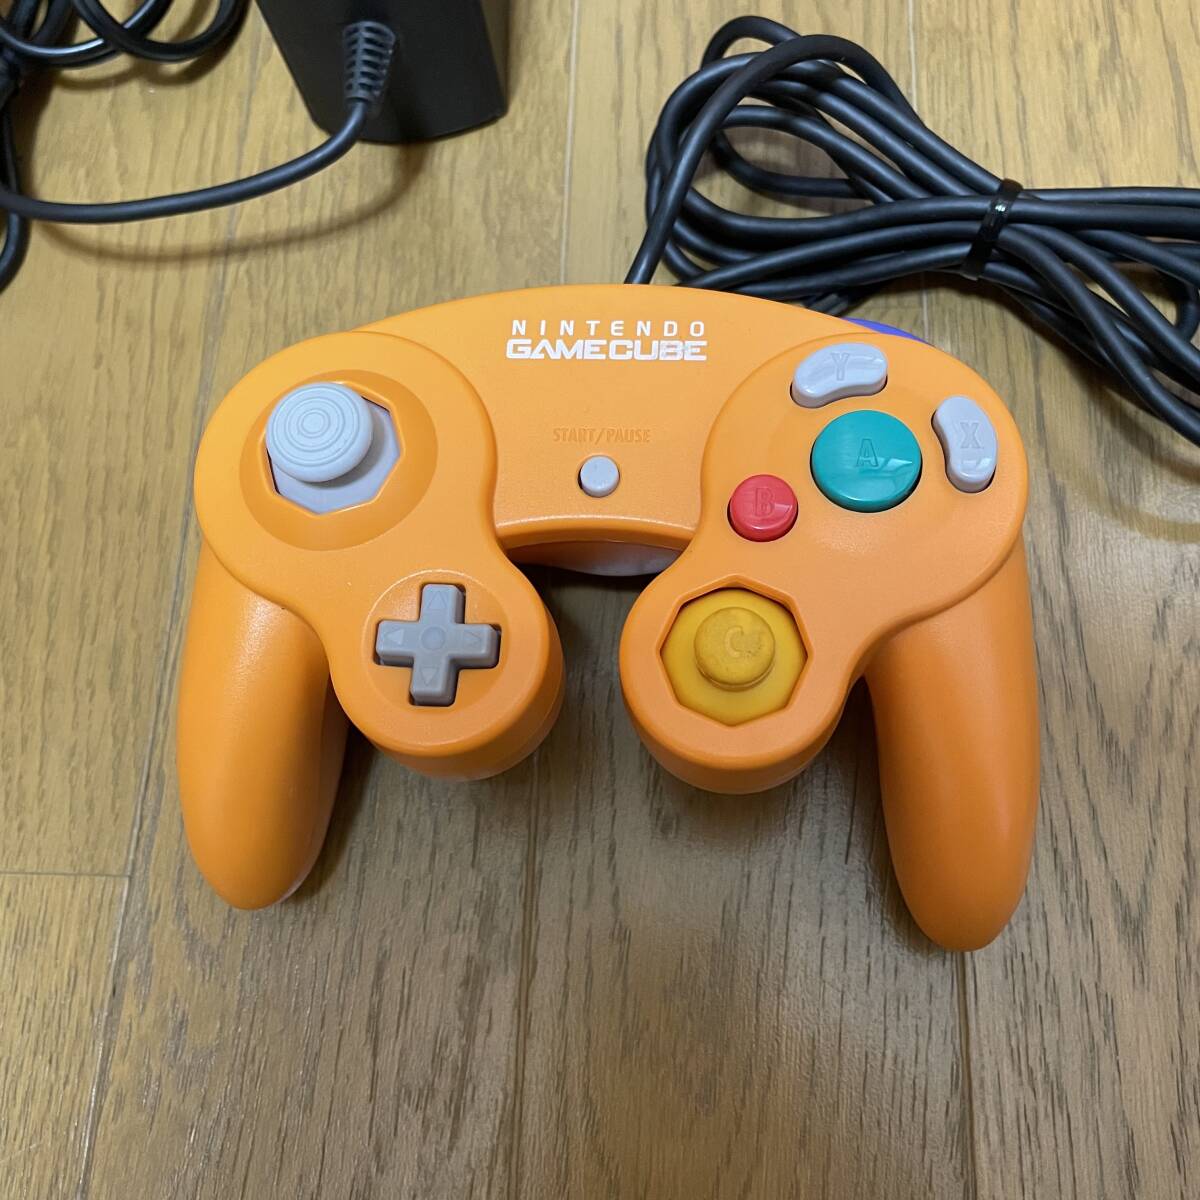  Game Cube orange body complete set instructions attaching GAMECUBE Nintendo nintendo Nintendo anonymity delivery 